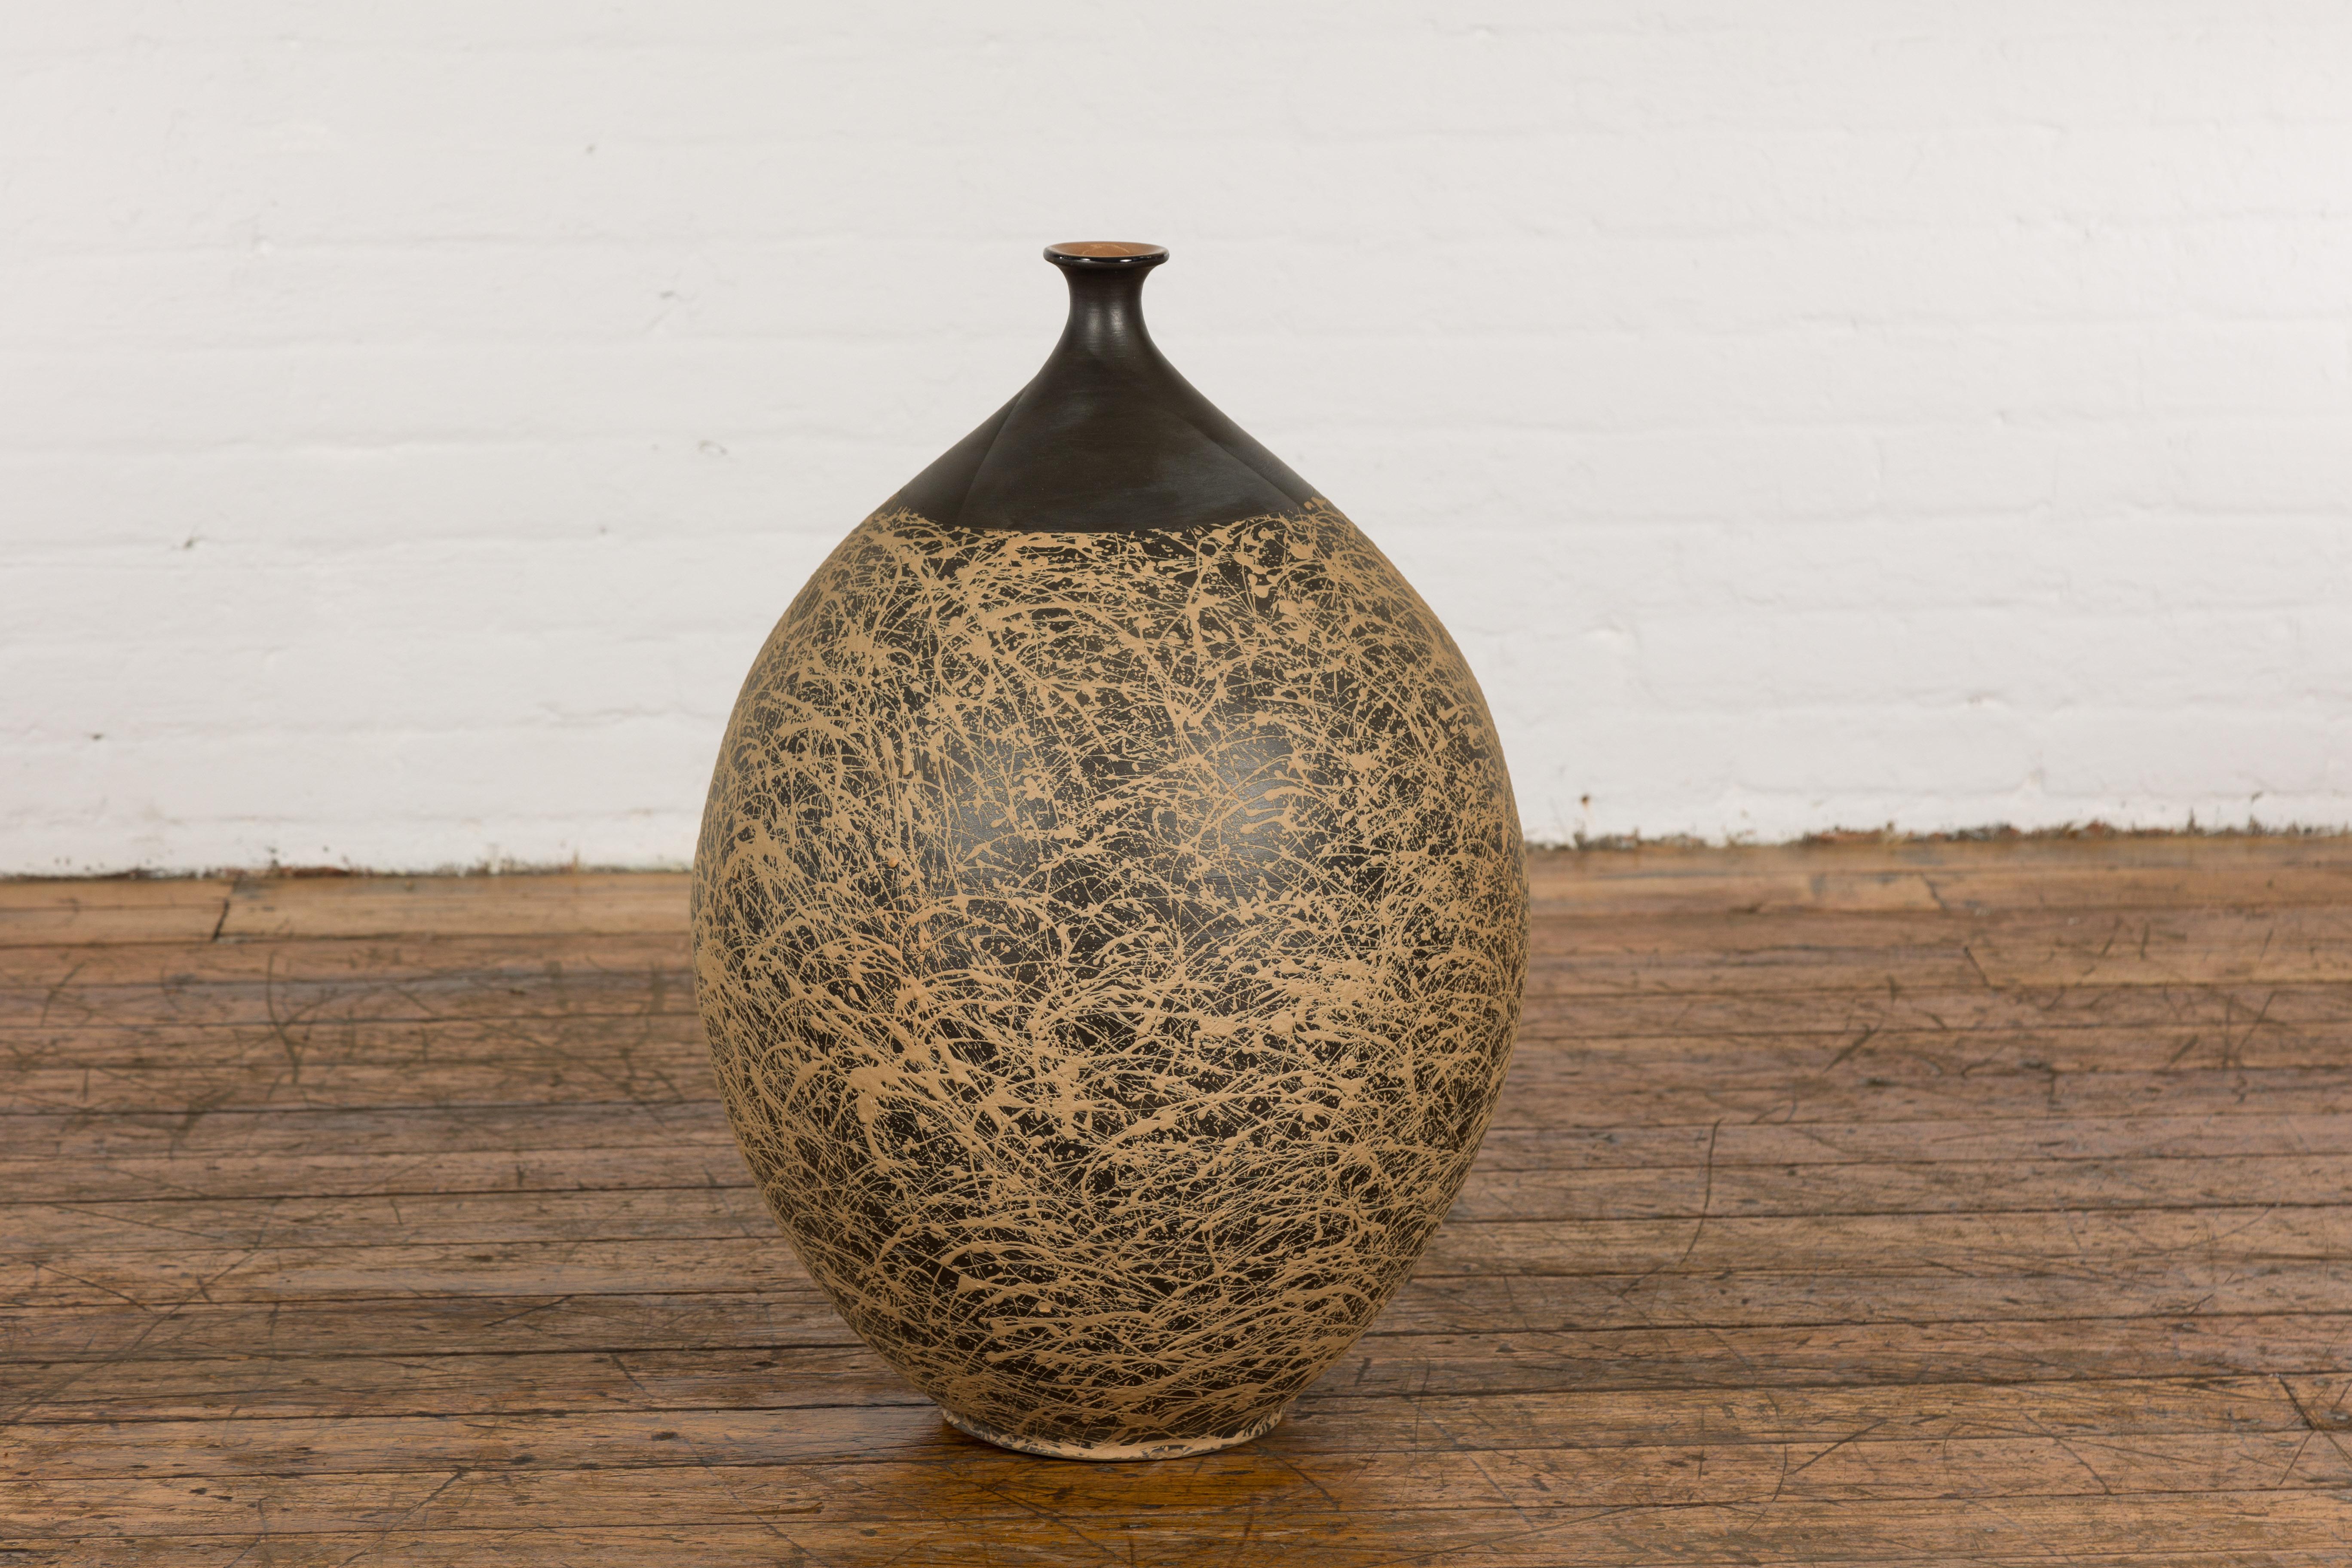 A large contemporary Prem Collection artisan hand crafted ceramic vase or object with narrow mouth, black ground, energetic hand-painted brown dripping décor, brown glazed interior and tapering lines. Experience the merging of modern design and